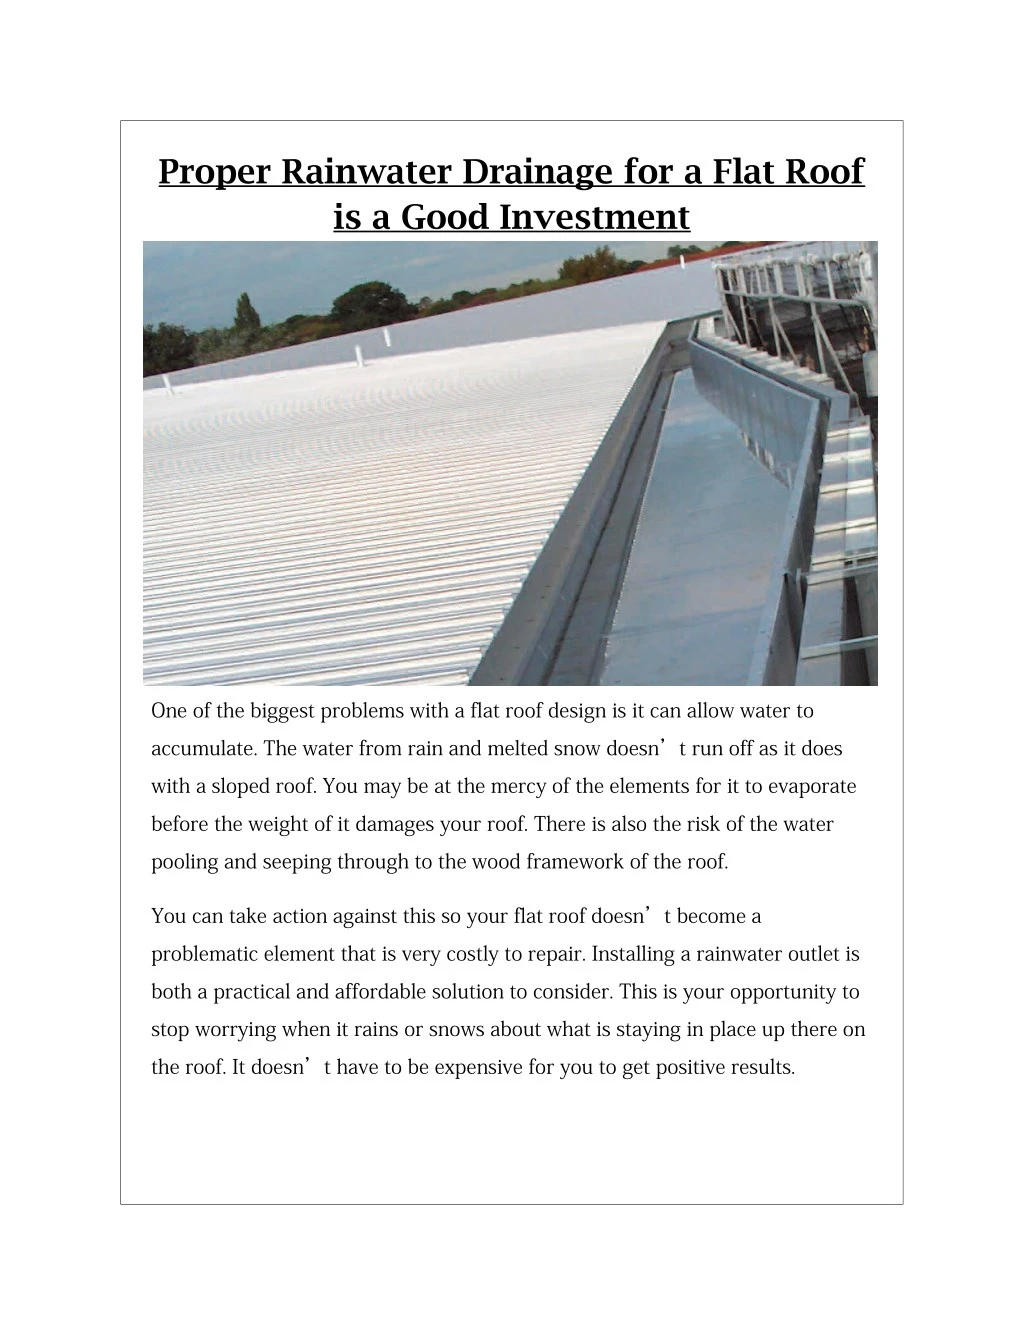 proper rainwater drainage for a flat roof